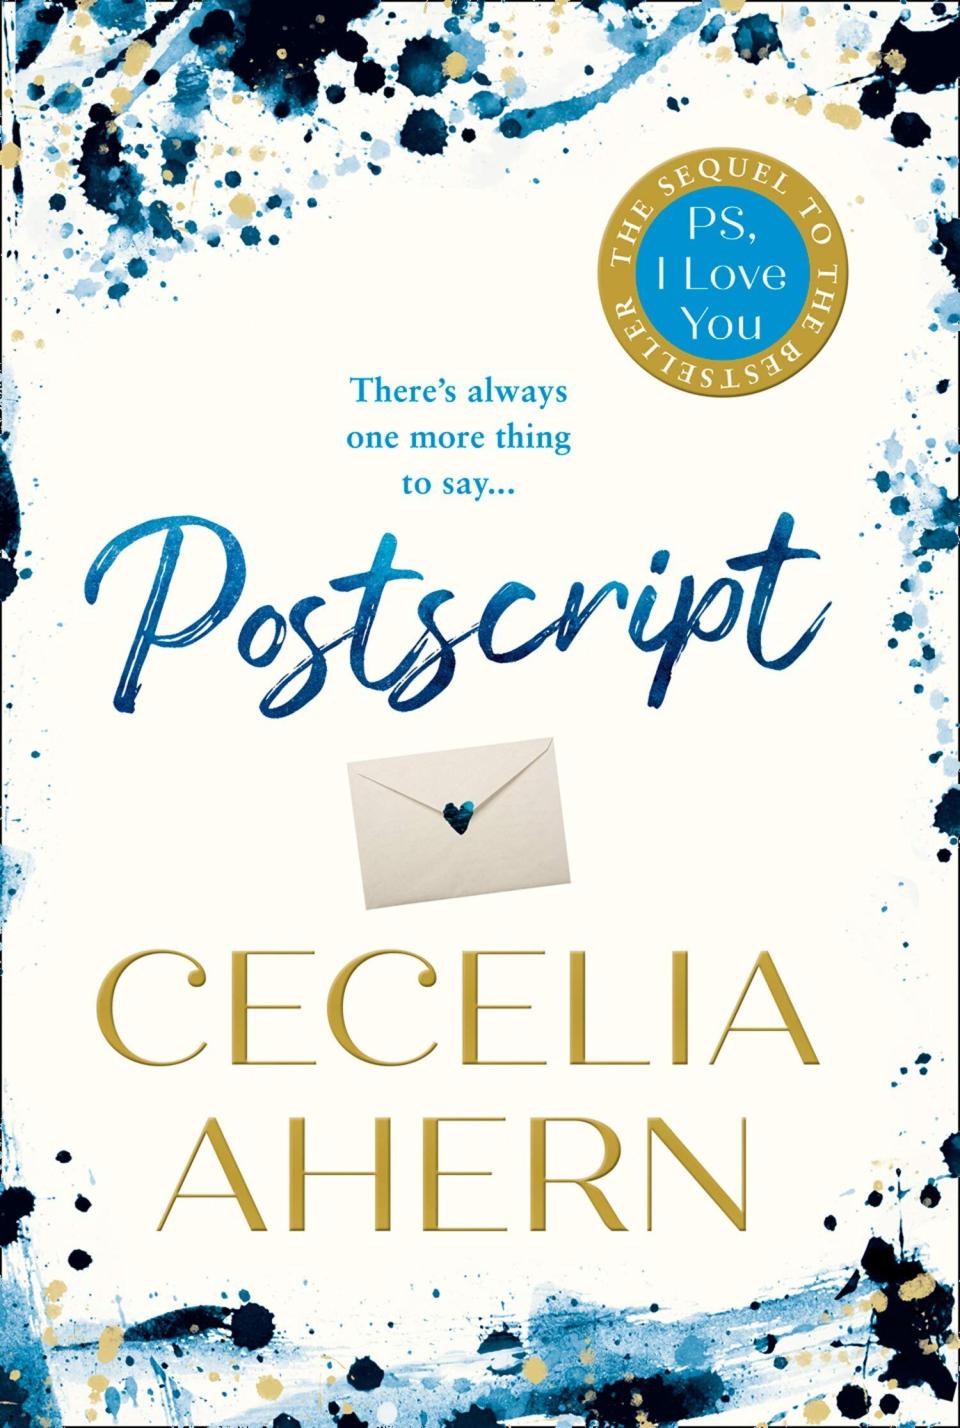 It&rsquo;s time to cry: The long anticipated sequel to &ldquo;PS, I Love You&rdquo; is here. &ldquo;Postscript&rdquo; picks up the story of Holly Kennedy seven years after her husband&rsquo;s death. After reluctantly sharing her story on a podcast, she&rsquo;s overwhelmed with notes from terminally ill patients that want to leave notes behind for their own loved ones. Fans of the first book in this series are sure to enjoy this funny and bittersweet tale. Read more about it on <a href="https://www.goodreads.com/book/show/49985791-postscript" target="_blank" rel="noopener noreferrer">Goodreads</a>, and <a href="https://amzn.to/36MhWEO" target="_blank" rel="noopener noreferrer">grab a copy on Amazon</a>.&lt;br&gt;&lt;br&gt;<i>Expected release date: Feb. 11</i>